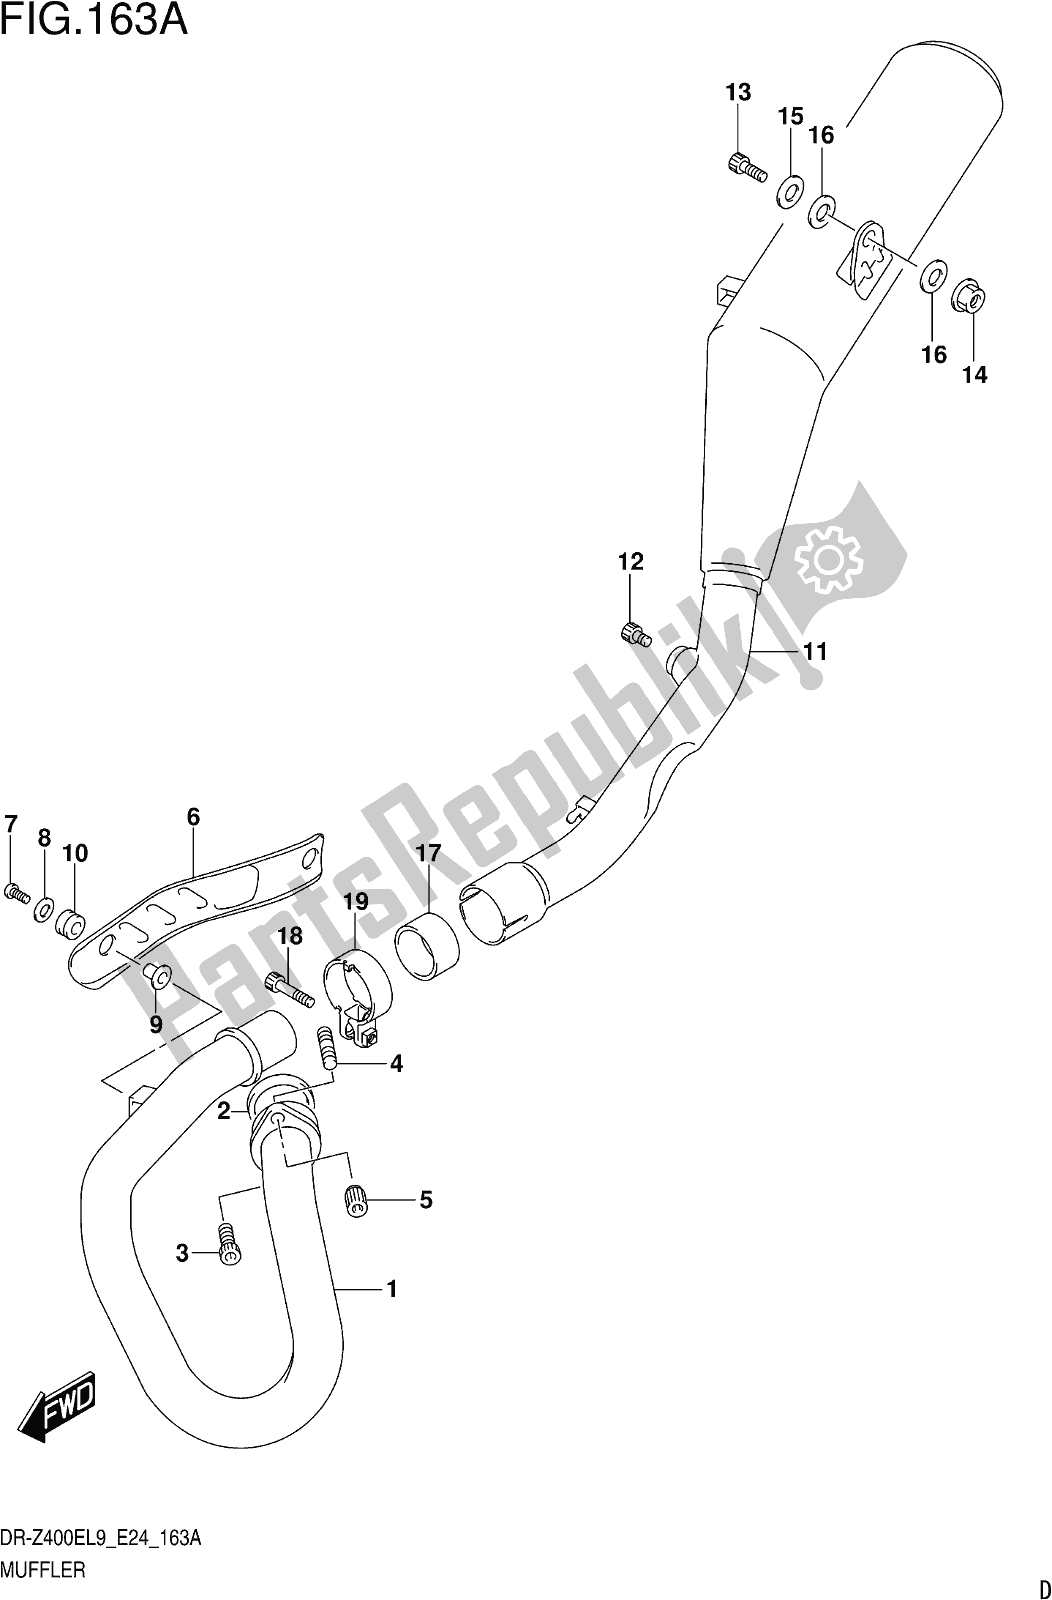 All parts for the Fig. 163a Muffler of the Suzuki DR-Z 400E 2019